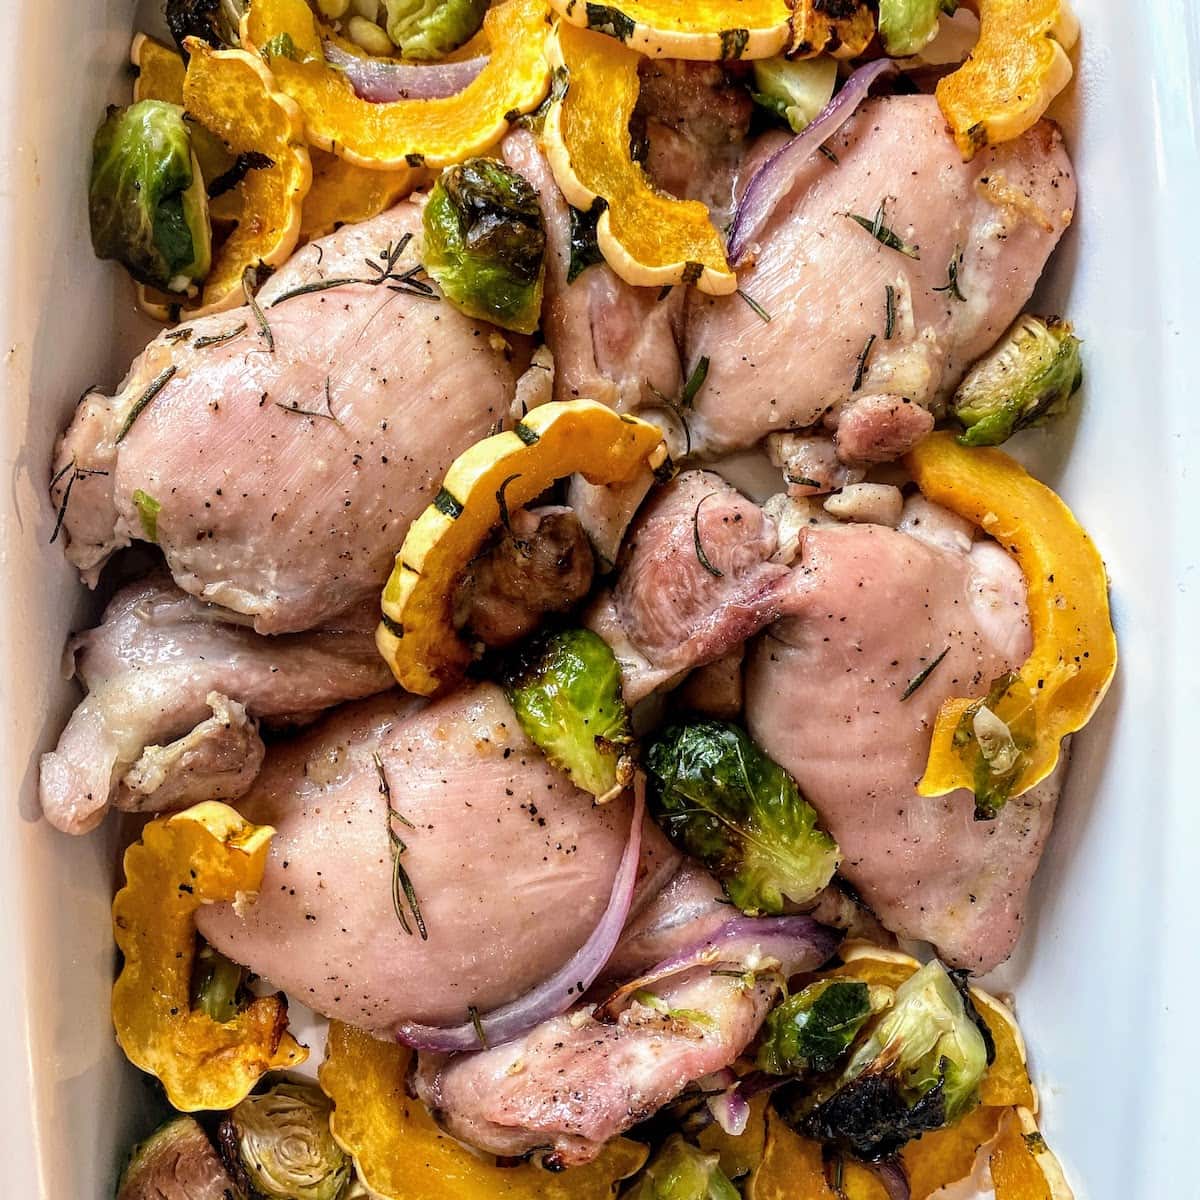 chicken, squash and brussels sprouts white dish